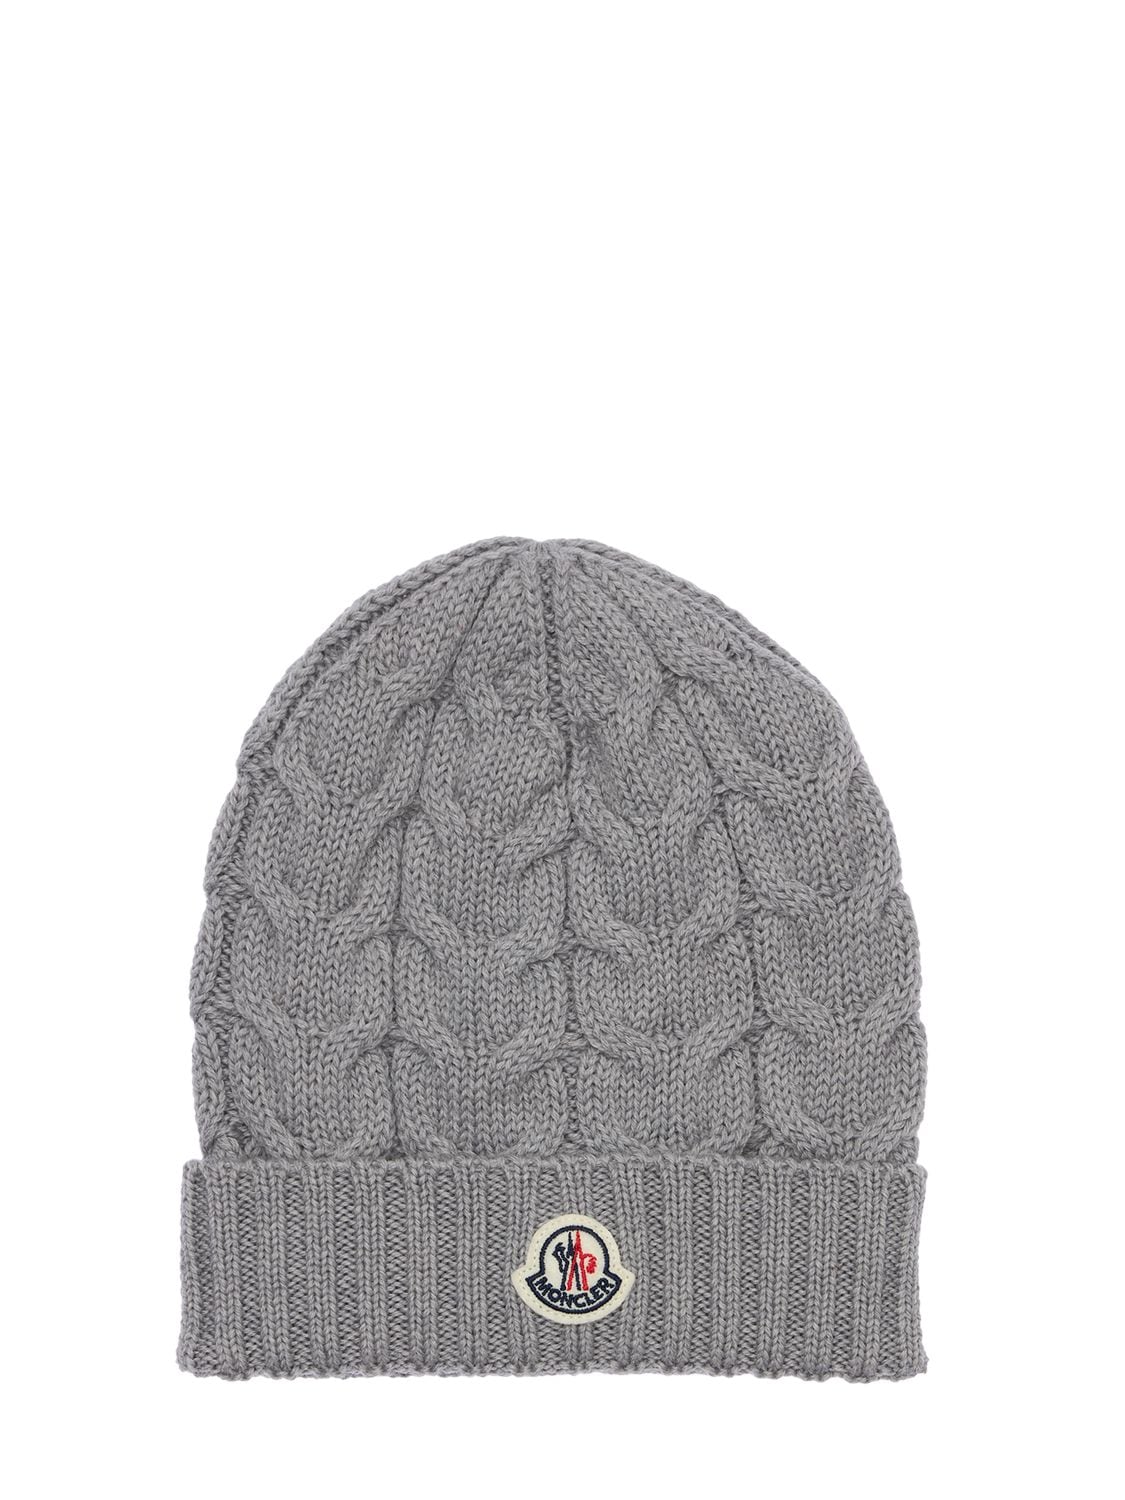 Wool Cable Knit Beanie Hat W/ Logo